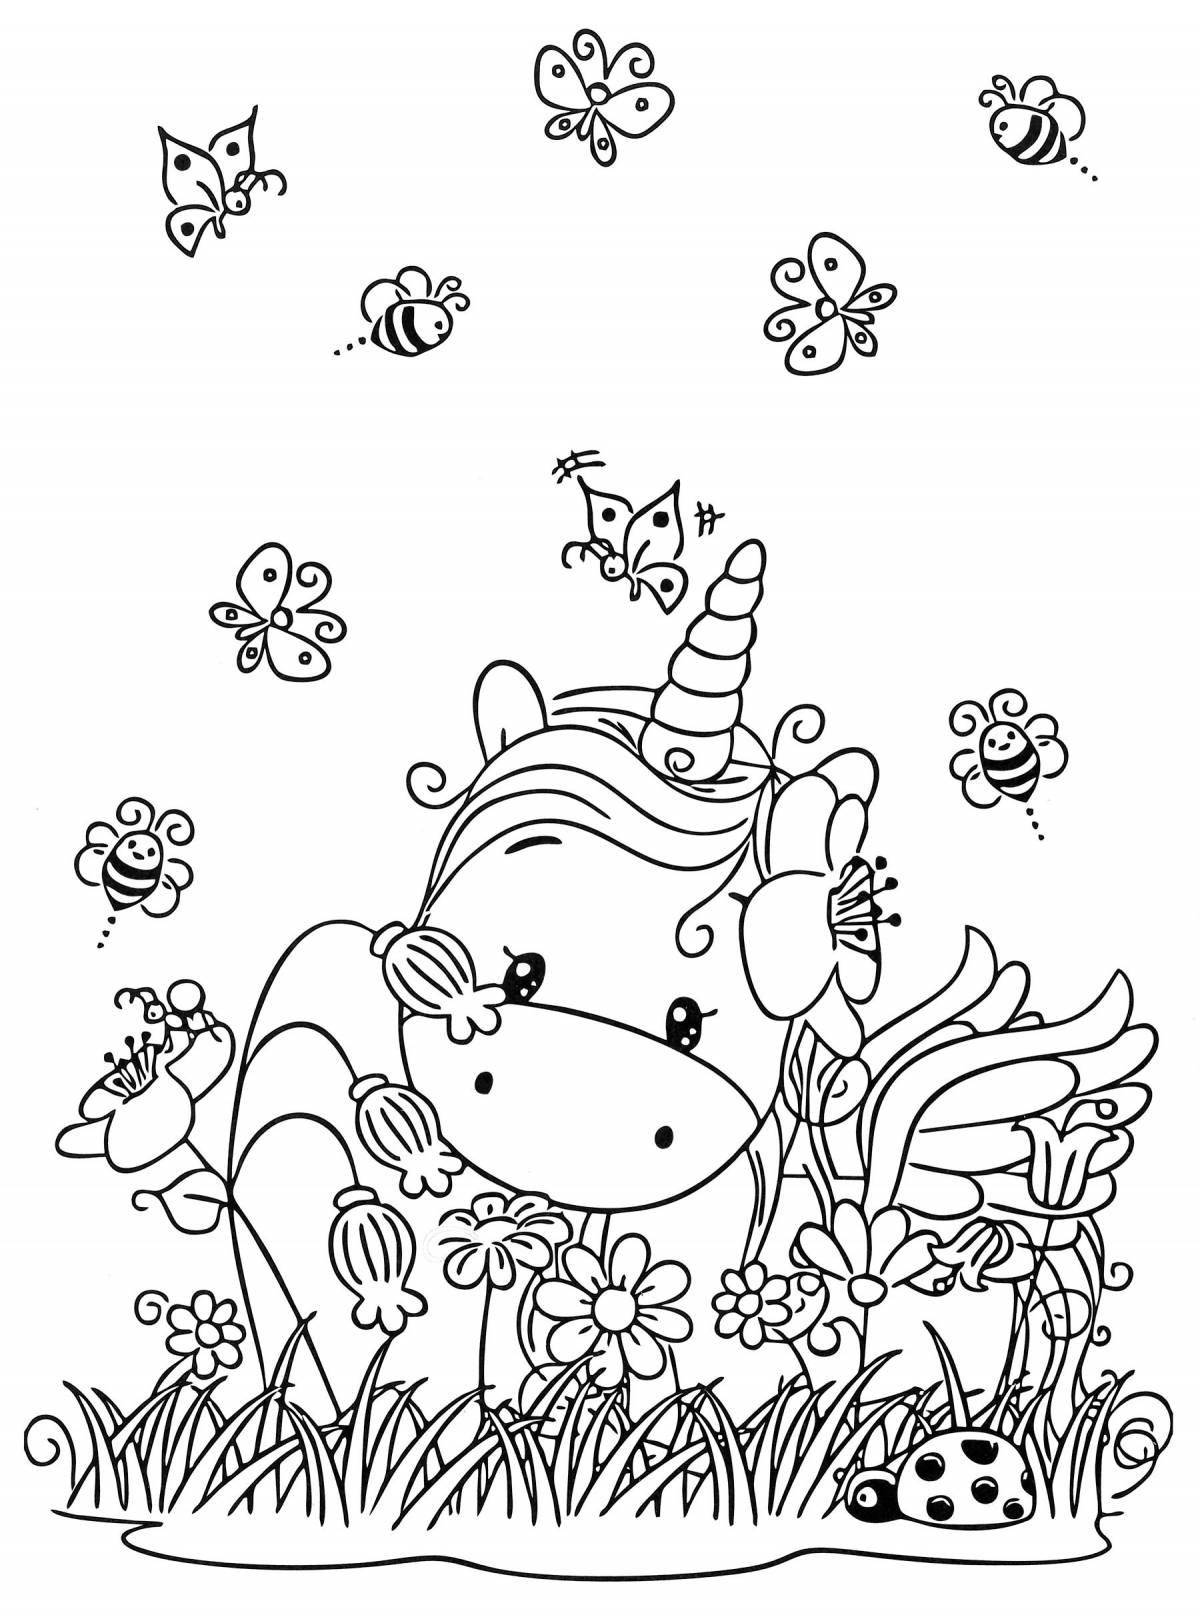 Fun spiral coloring page website